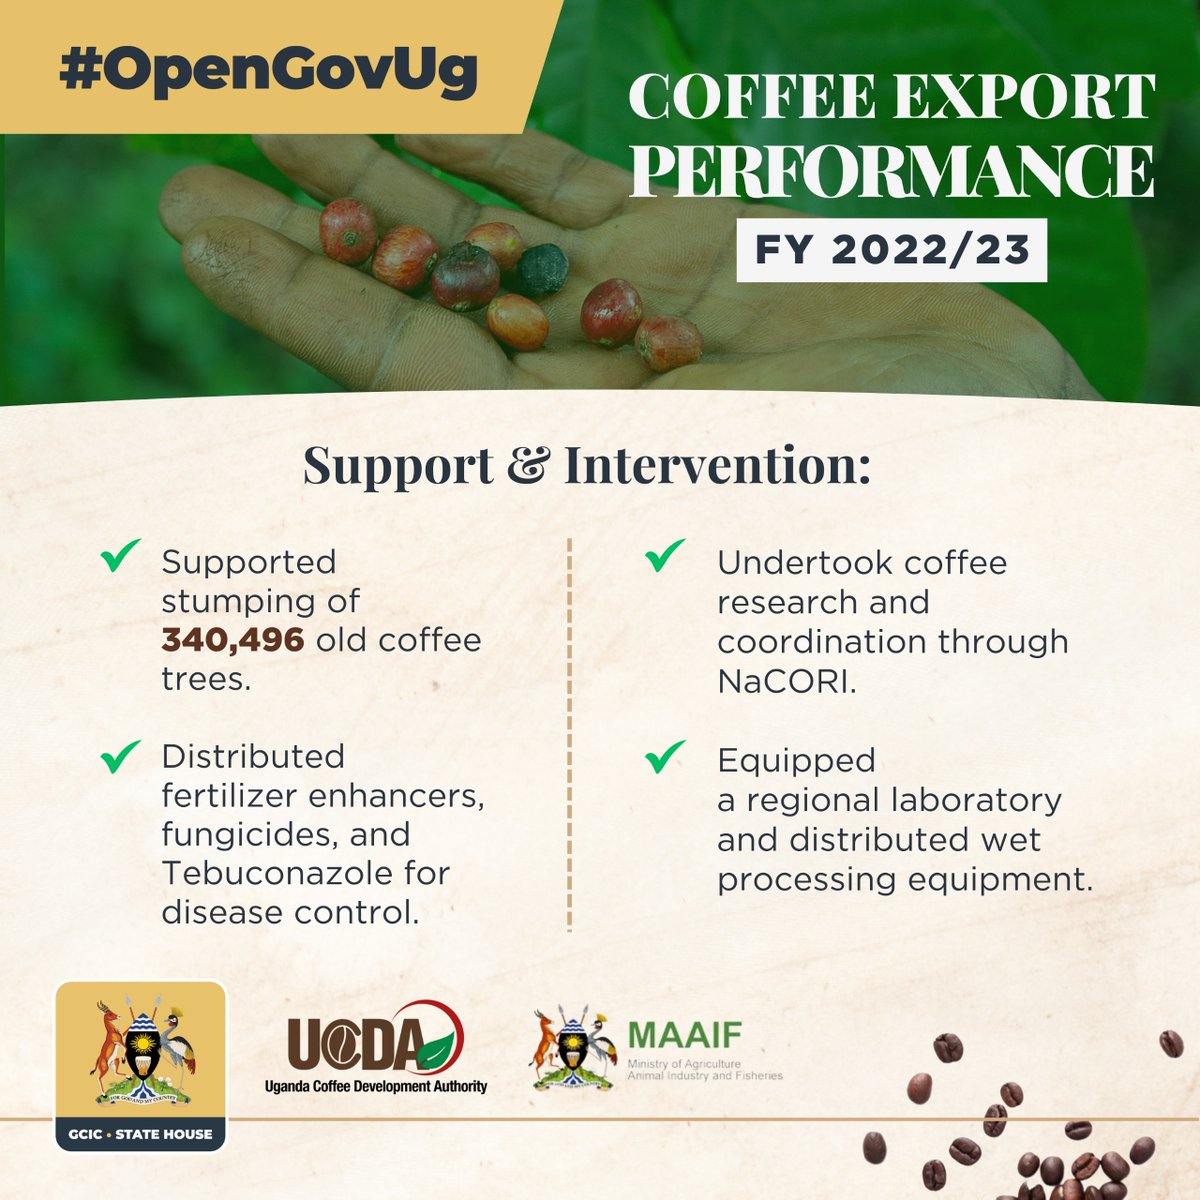 .@CoffeeUganda supported the removal of 340,496 old and unproductive coffee trees, with 335,353 trees in the Western region by 342 farmers and 5,143 trees in the Northern region by 20 farmers,while also assisting NaCORI in conducting coffee research and coordination. #OpenGovUg